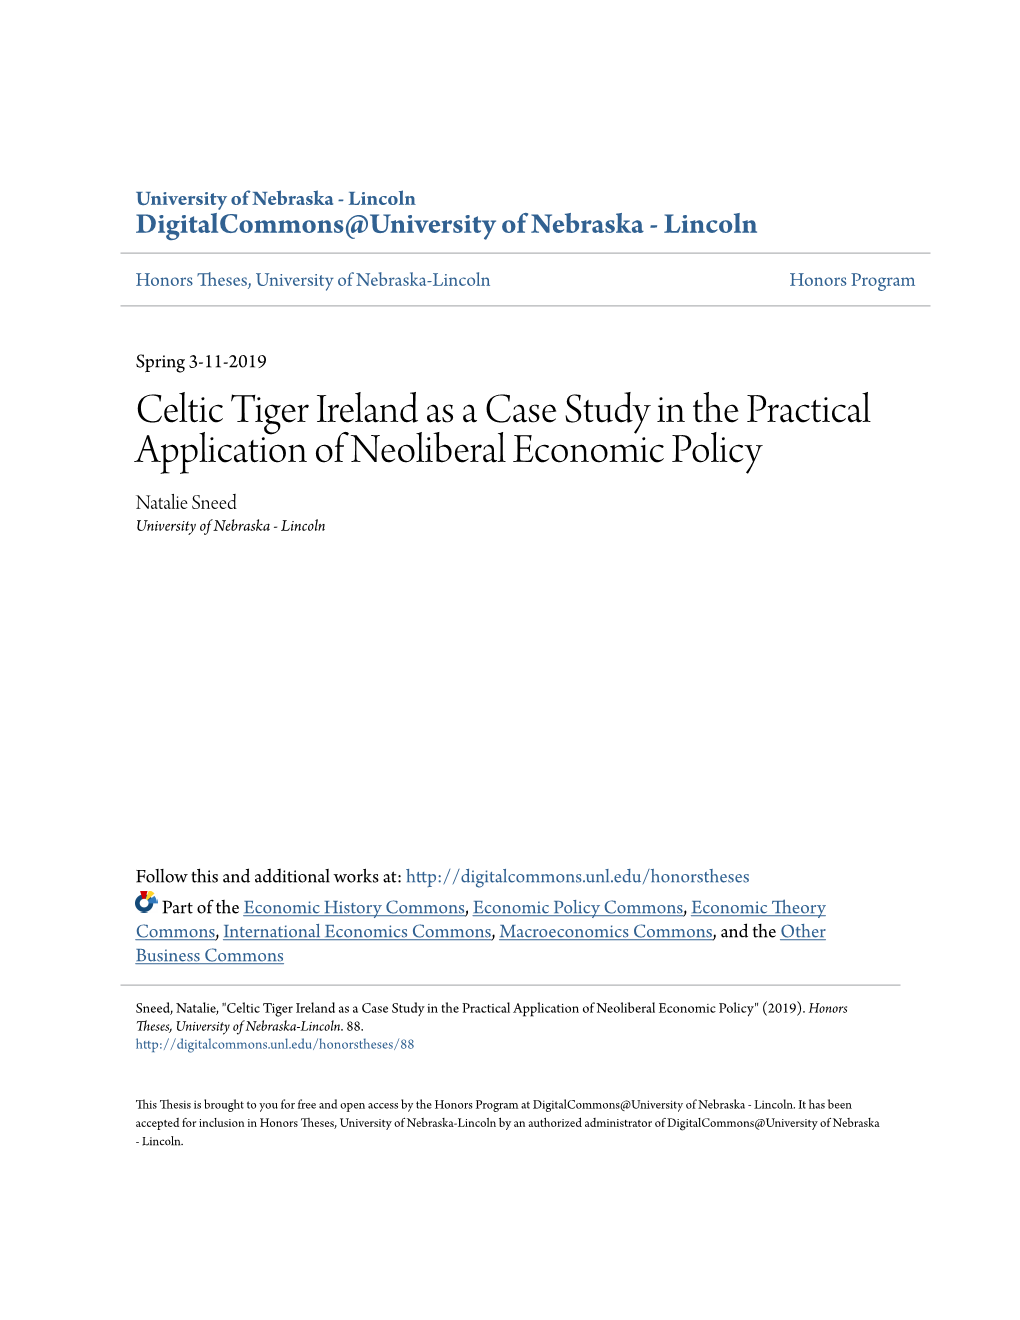 Celtic Tiger Ireland As a Case Study in the Practical Application of Neoliberal Economic Policy Natalie Sneed University of Nebraska - Lincoln